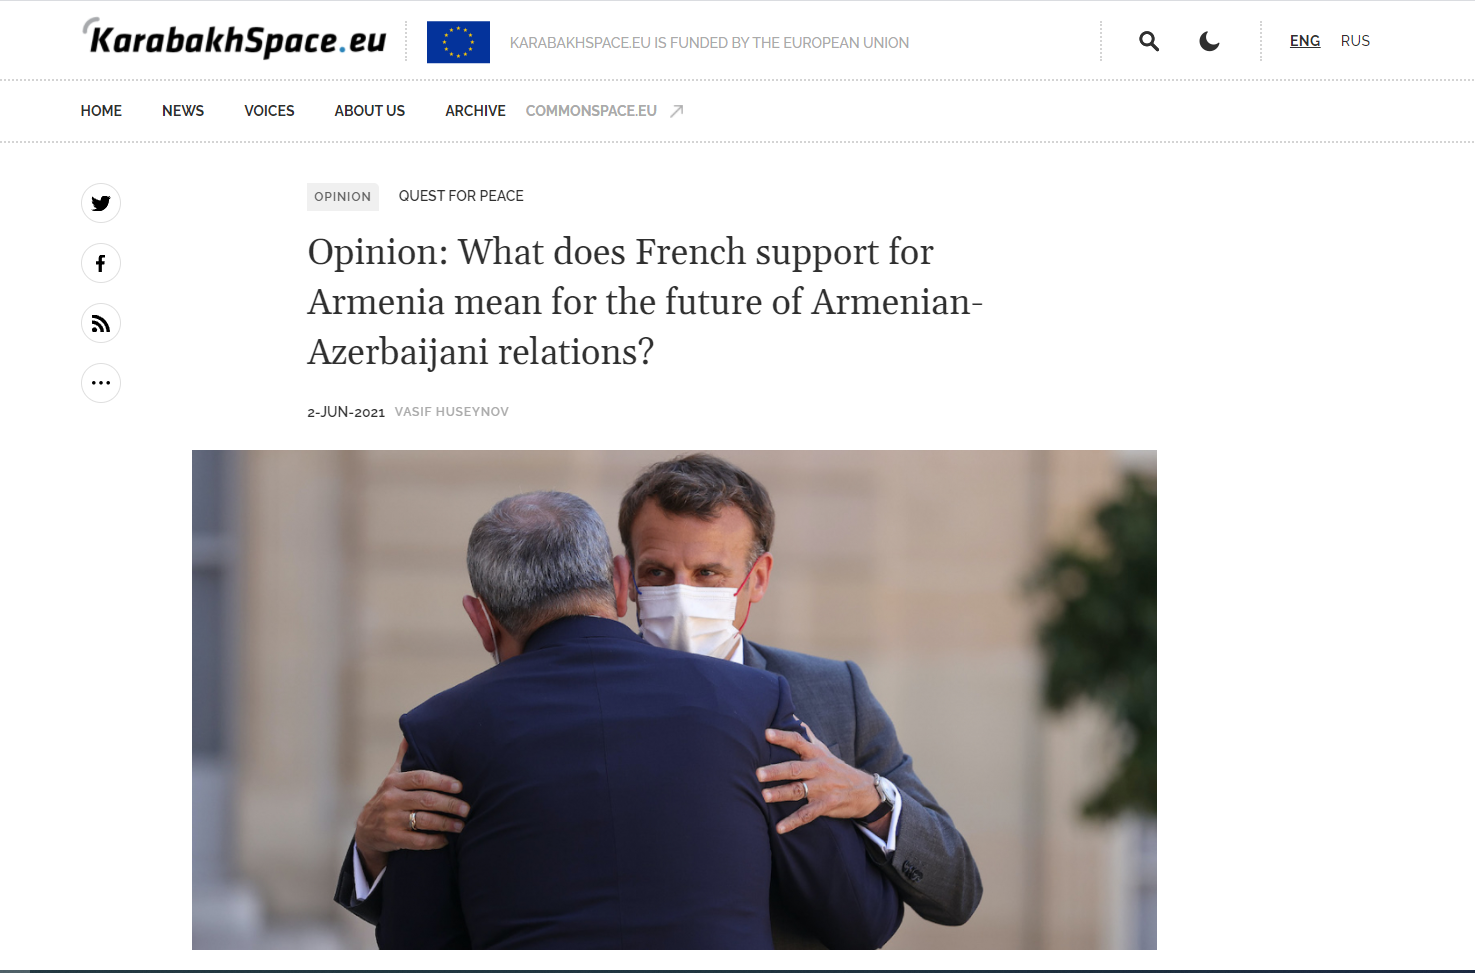 Opinion: What does French support for Armenia mean for the future of Armenian-Azerbaijani relations?